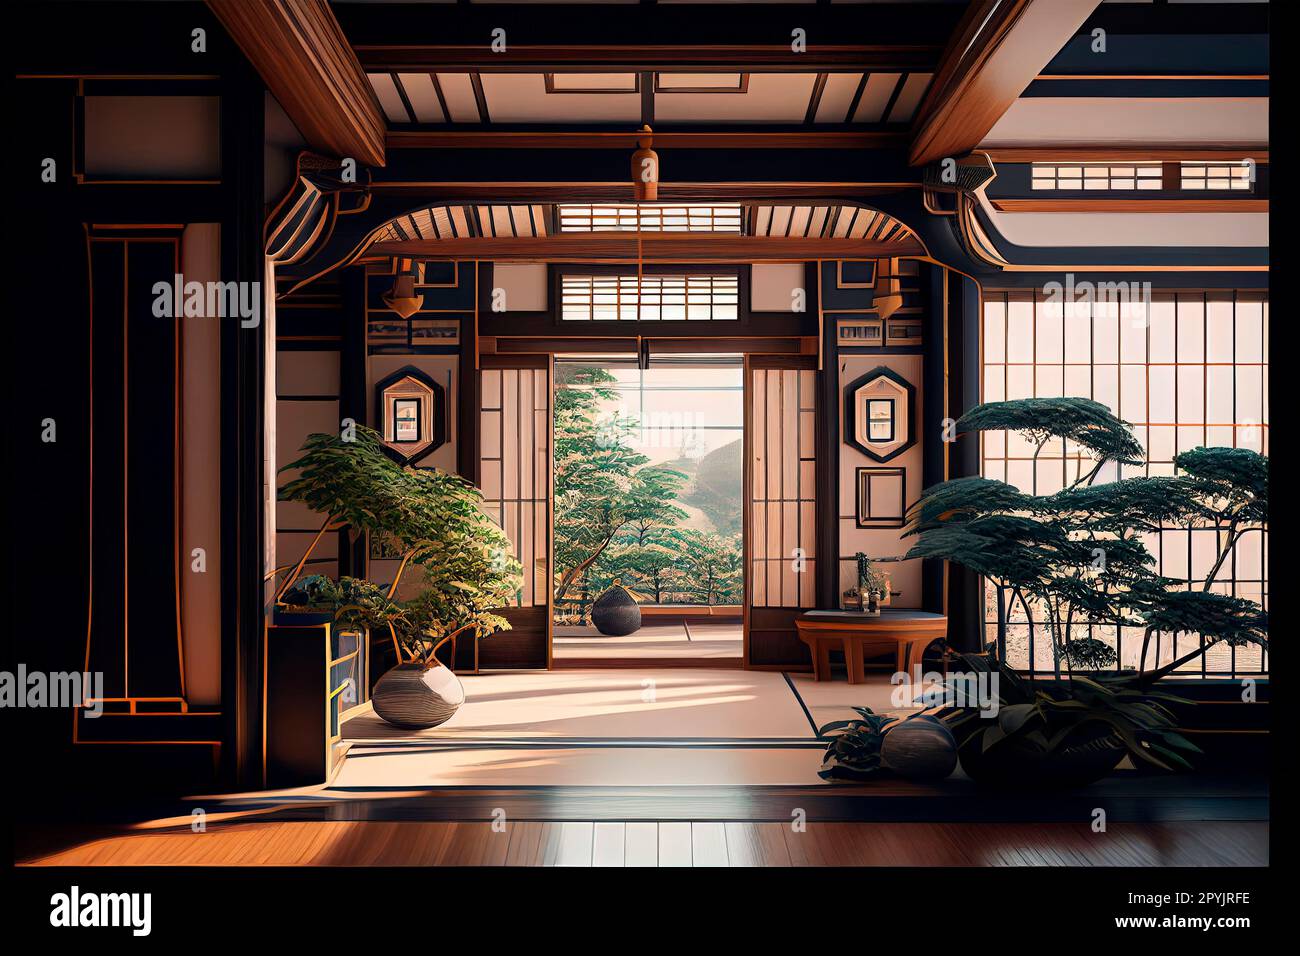 Minimal interior design in japanese style. Asian living room with open view to zen garden. Traditional asian architecture aesthetic. Stock Photo